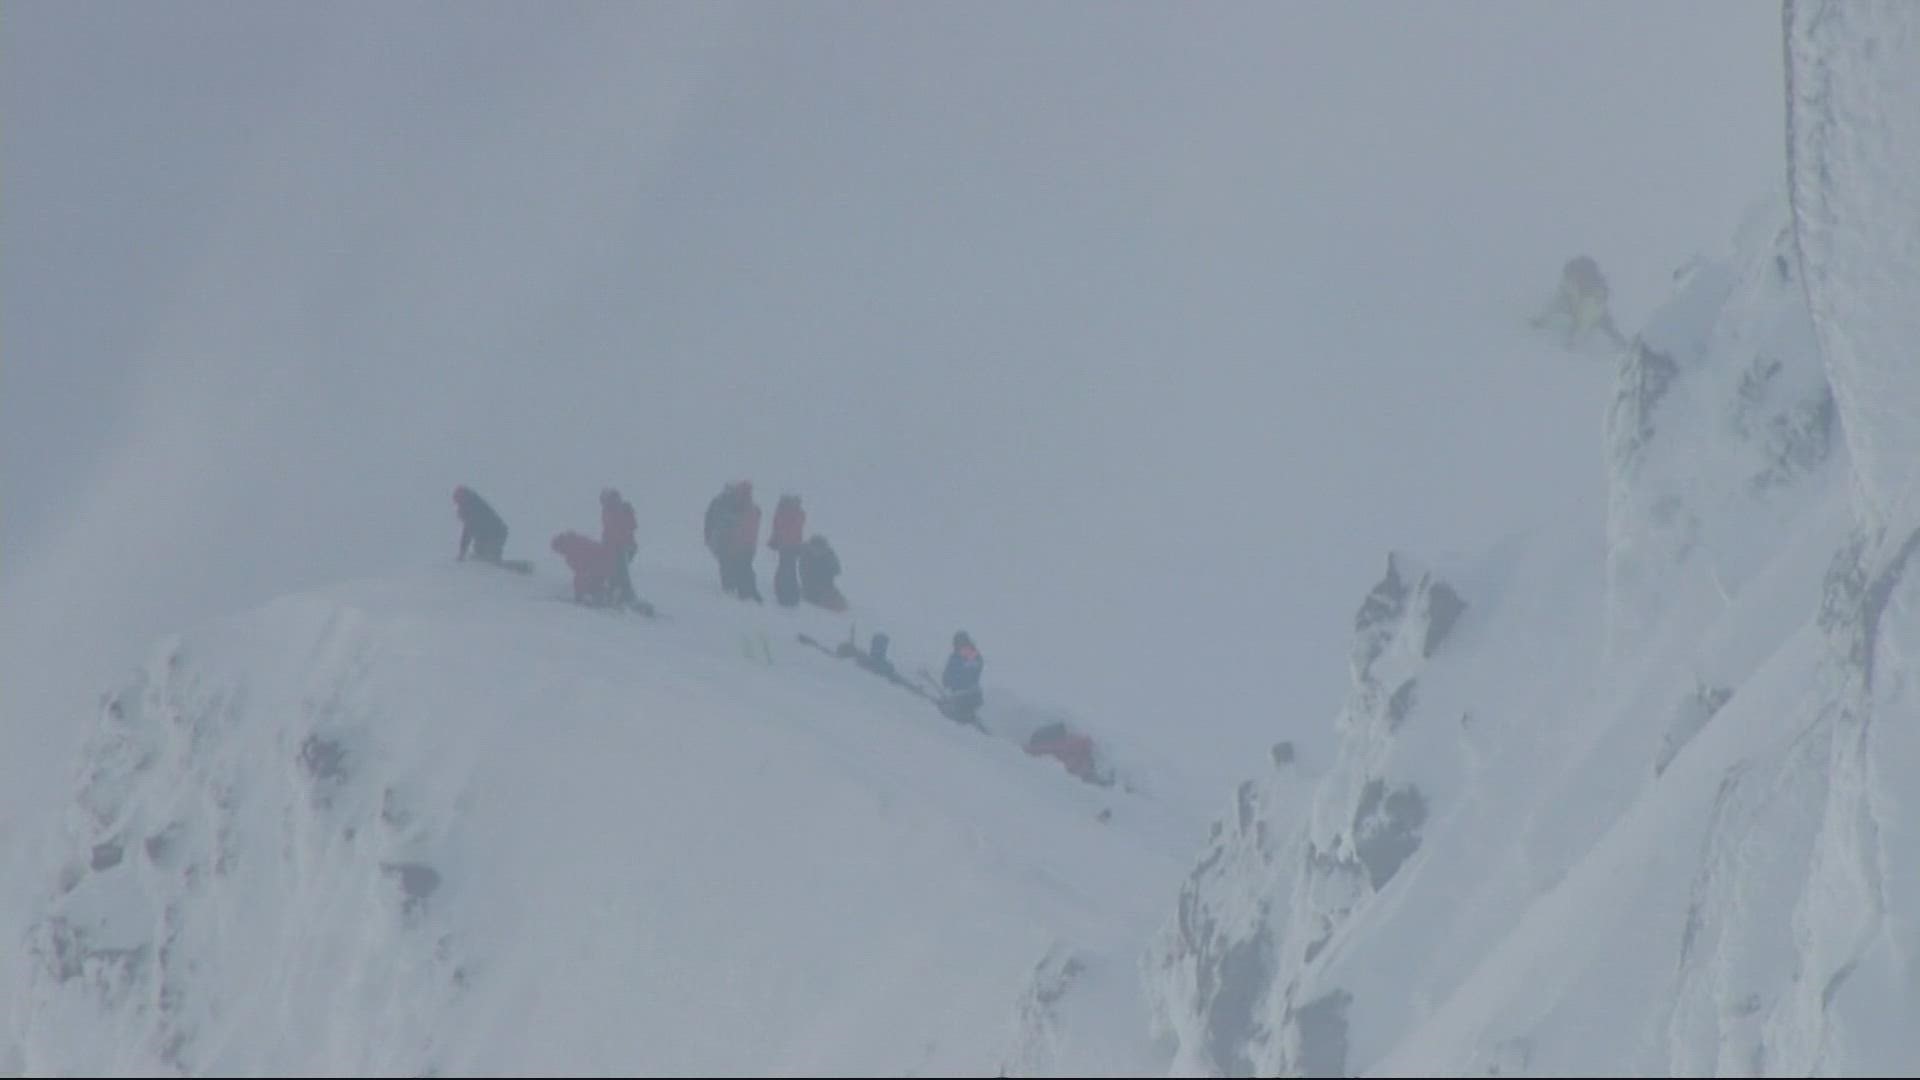 A major rescue effort came to a sad end Sunday, March 6, when a climber died and another was critically injured in a fall on Mount Hood. Joe Raineri reports.